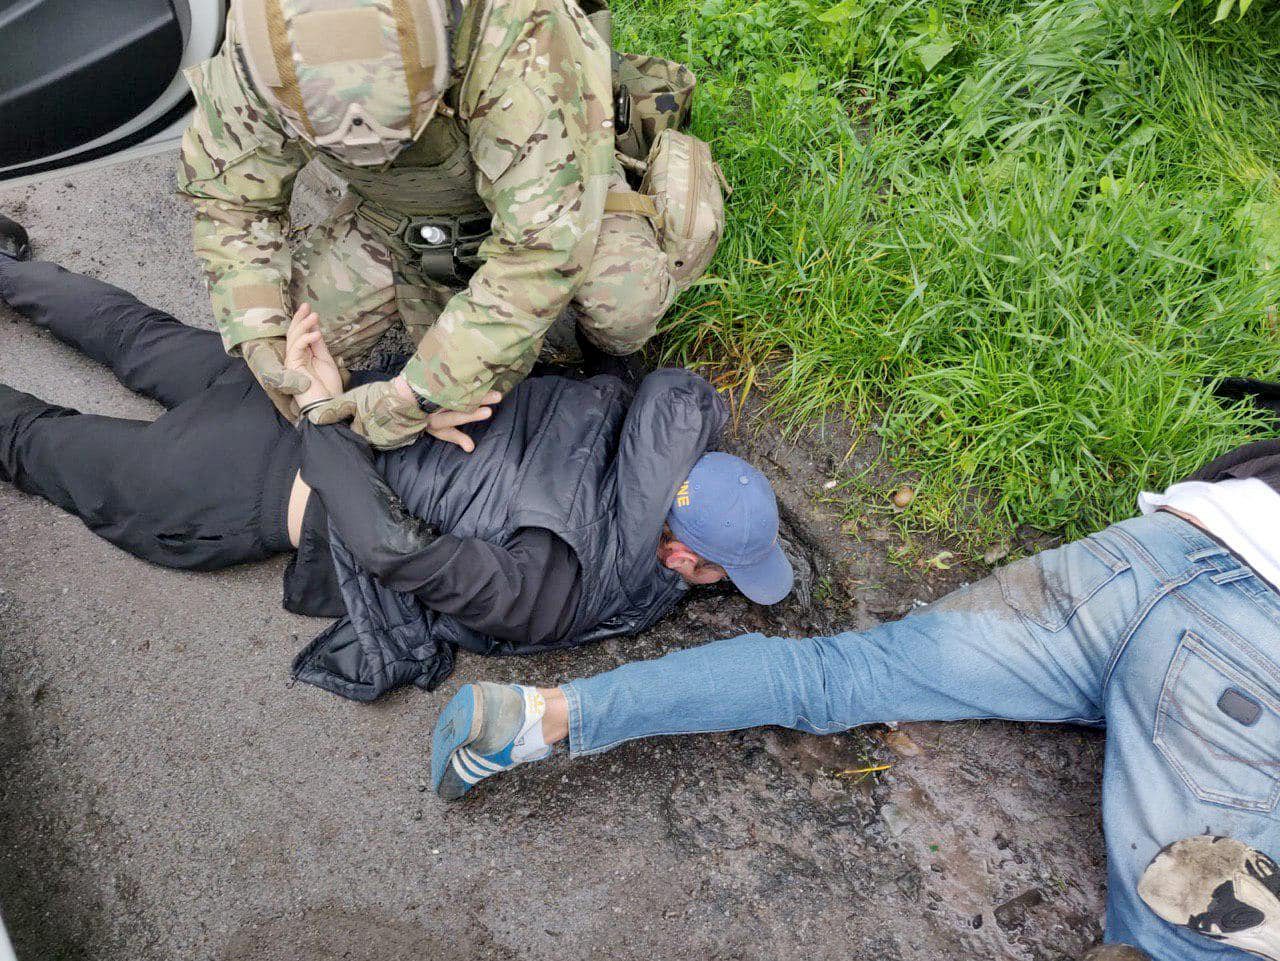 This handout picture taken and released by Ukrainian Interior Ministry press-service on May 29, 2020, shows people detained by the police in small town of Brovary, near Kiev. - Three people have been wounded and eleven arrested after a mass shootout between criminal gangs in a small town near Kiev, authorities said on May 29, 2020. Dozens of people staged a shootout early on May 29, in the streets of Brovary, a small town ten kilometres (eight miles) east of Kiev, police said. The cause of the clash was 